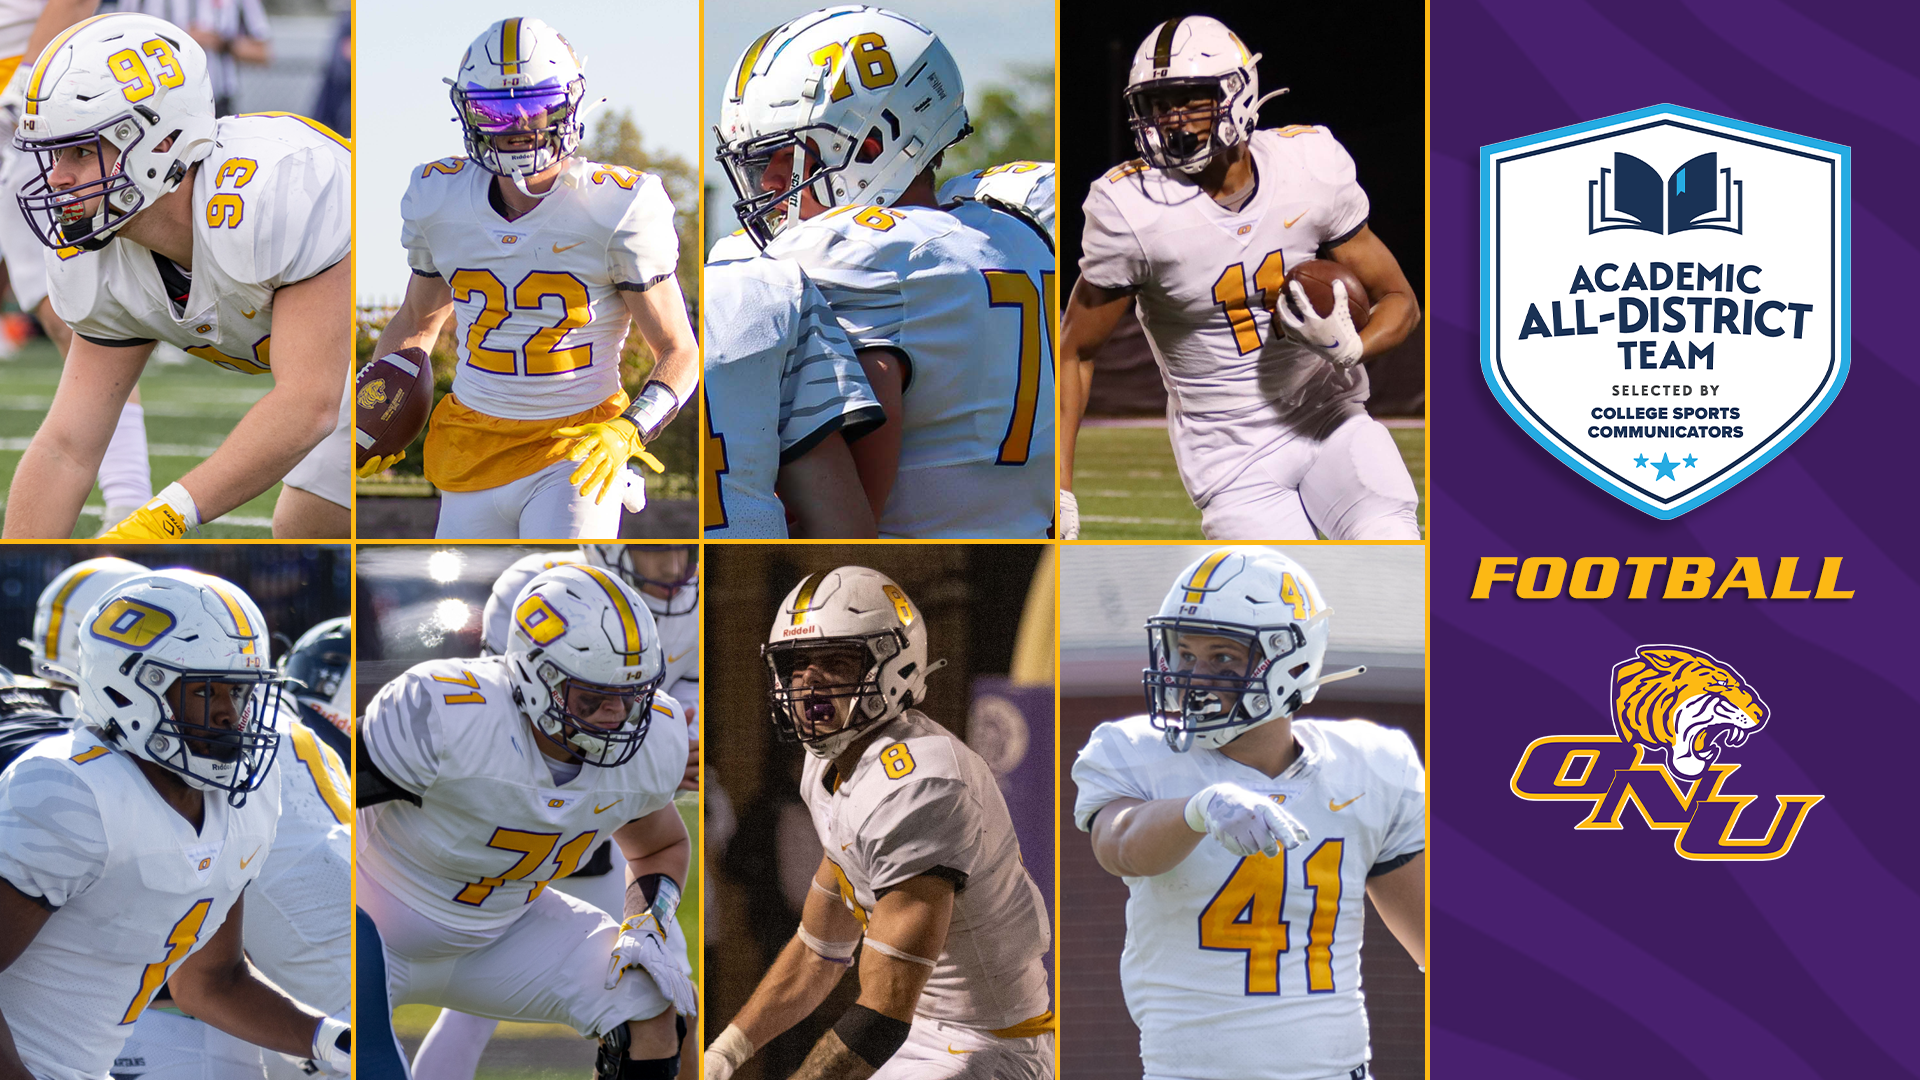 TIGERS PLACE EIGHT ON CSC ACADEMIC ALL-DISTRICT TEAM